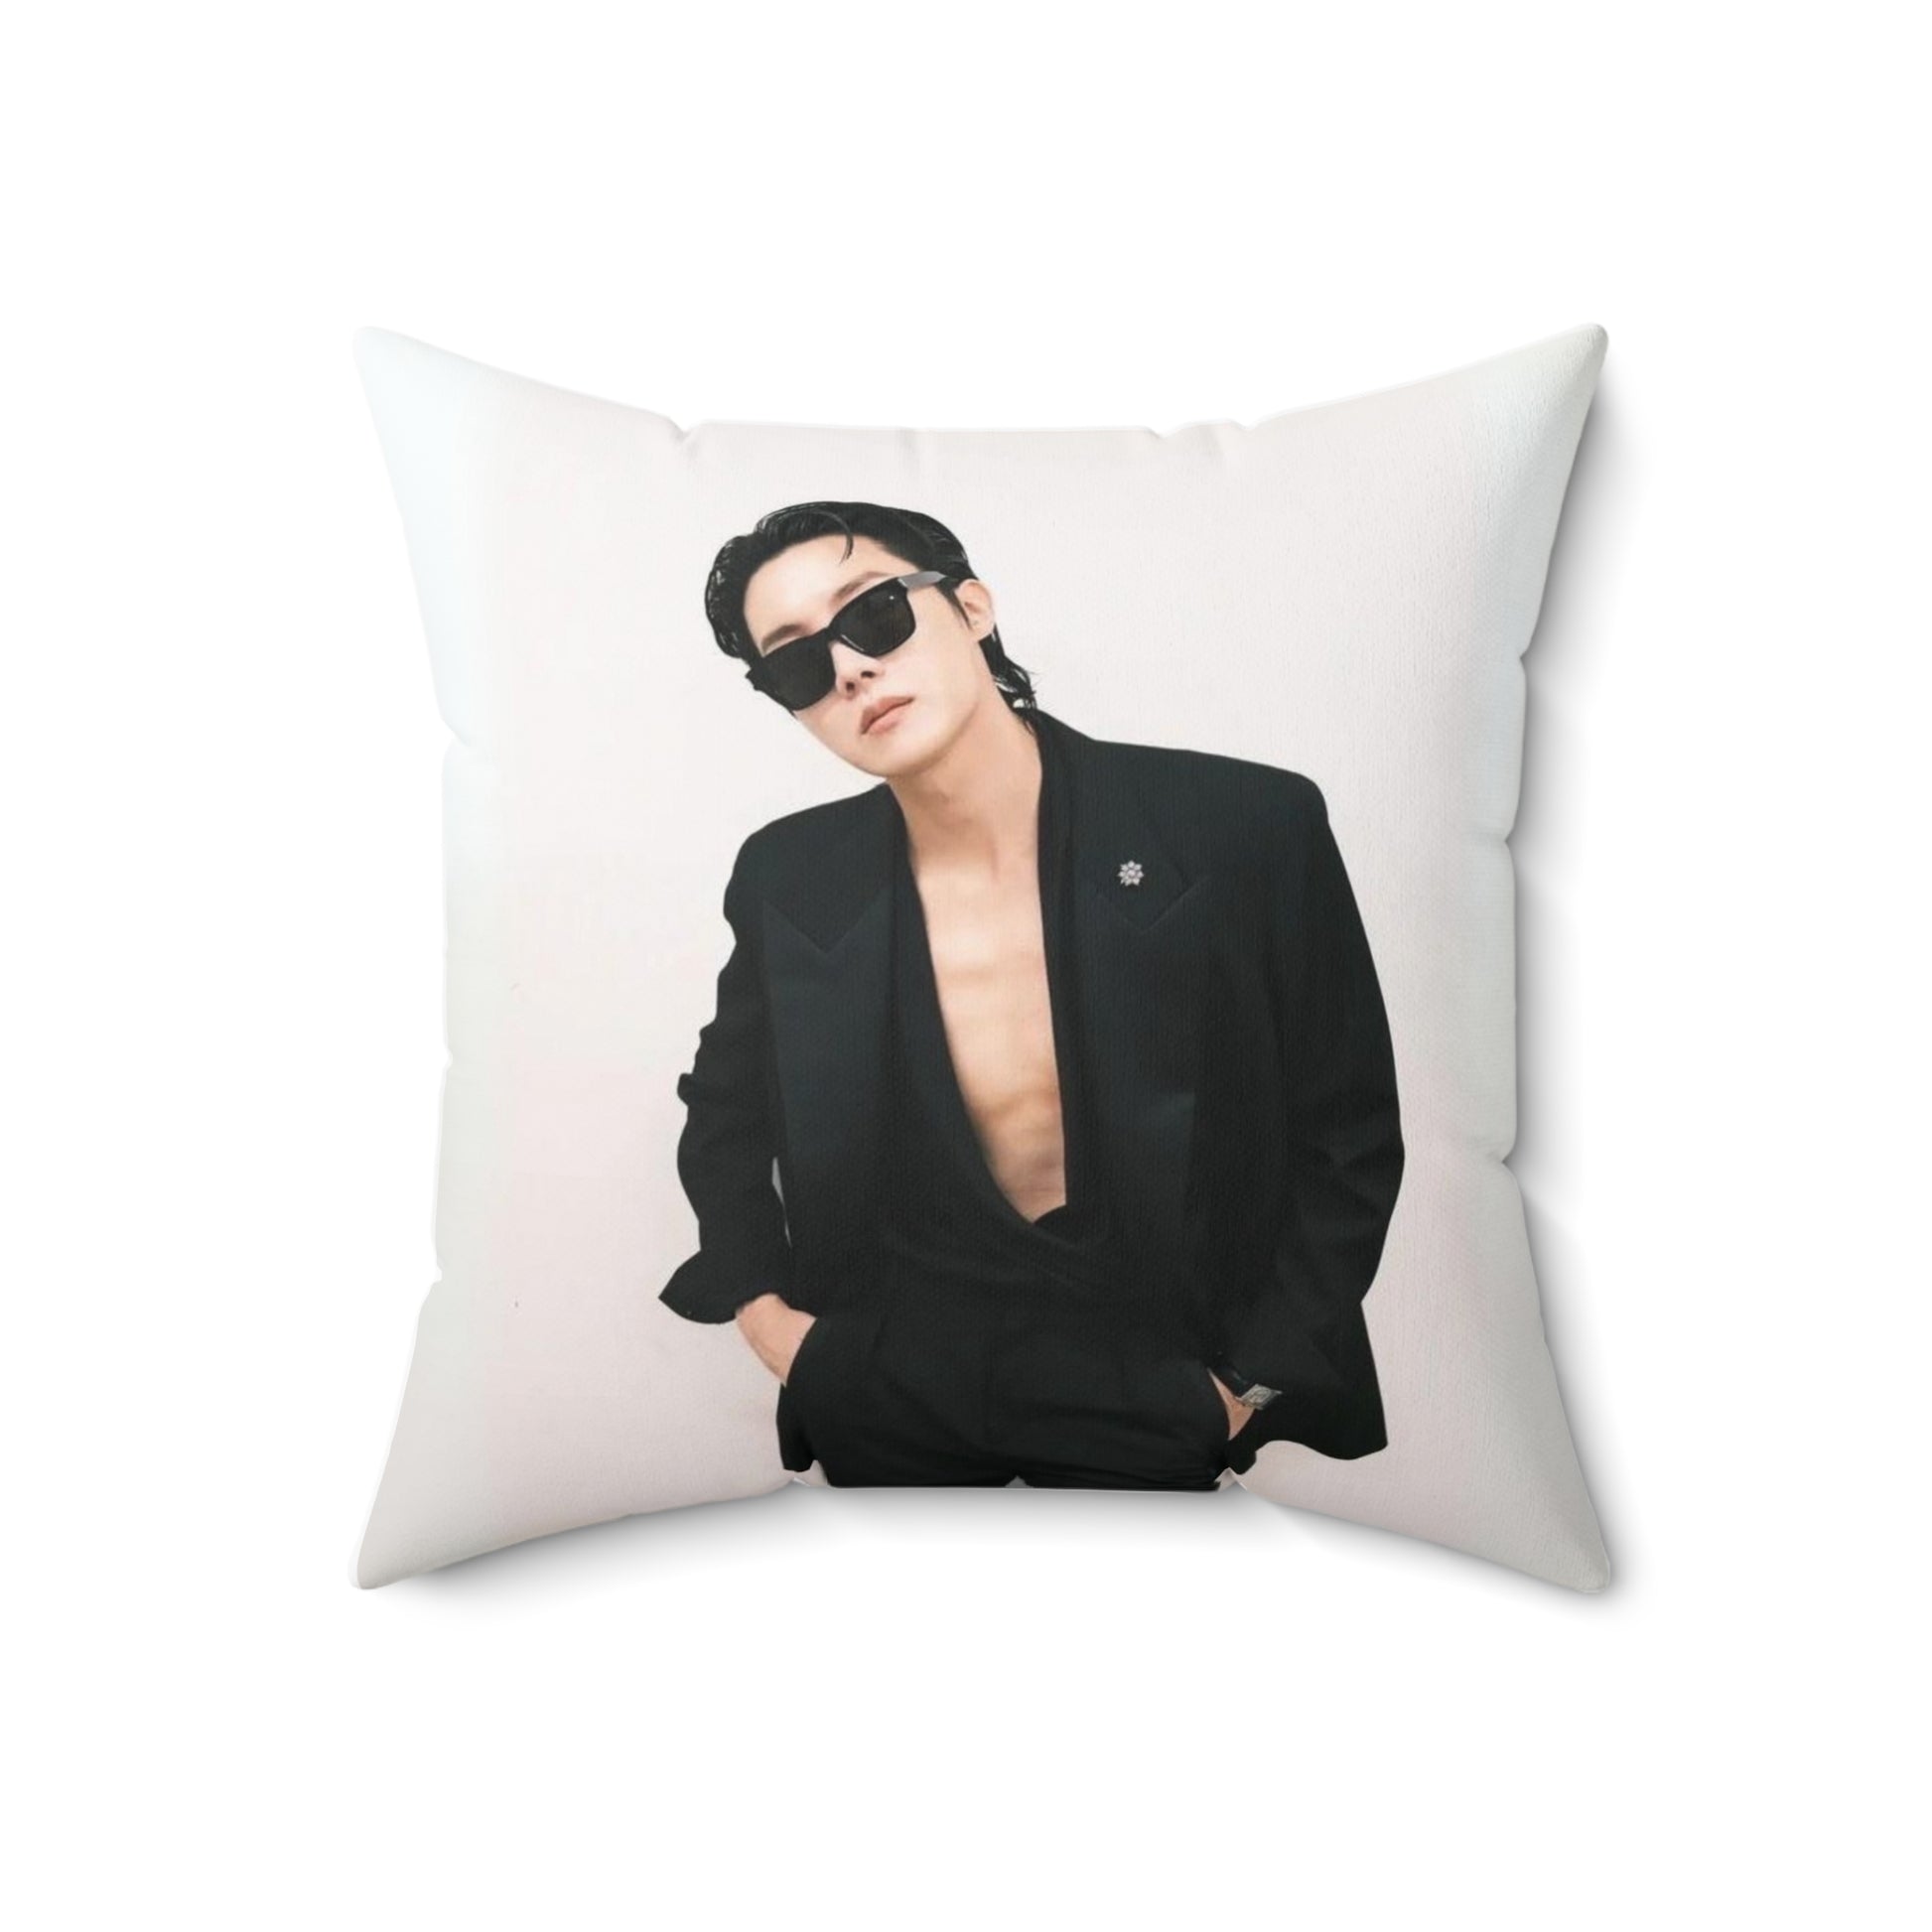 Jhope abs photo - concert photo pillow